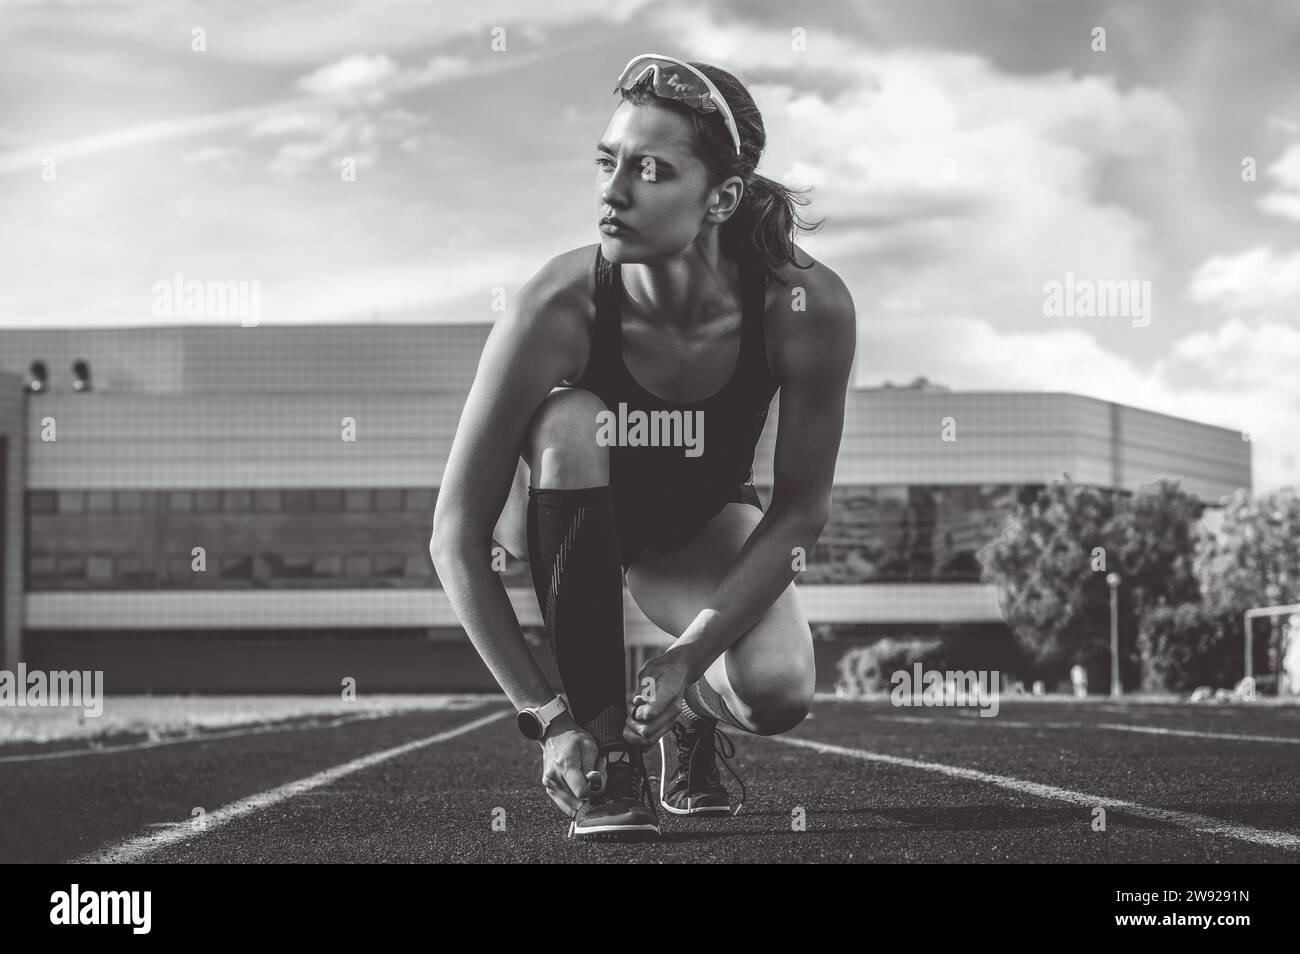 Image of an athlete tying her shoelaces with spikes. Running concept. Mixed media Stock Photo